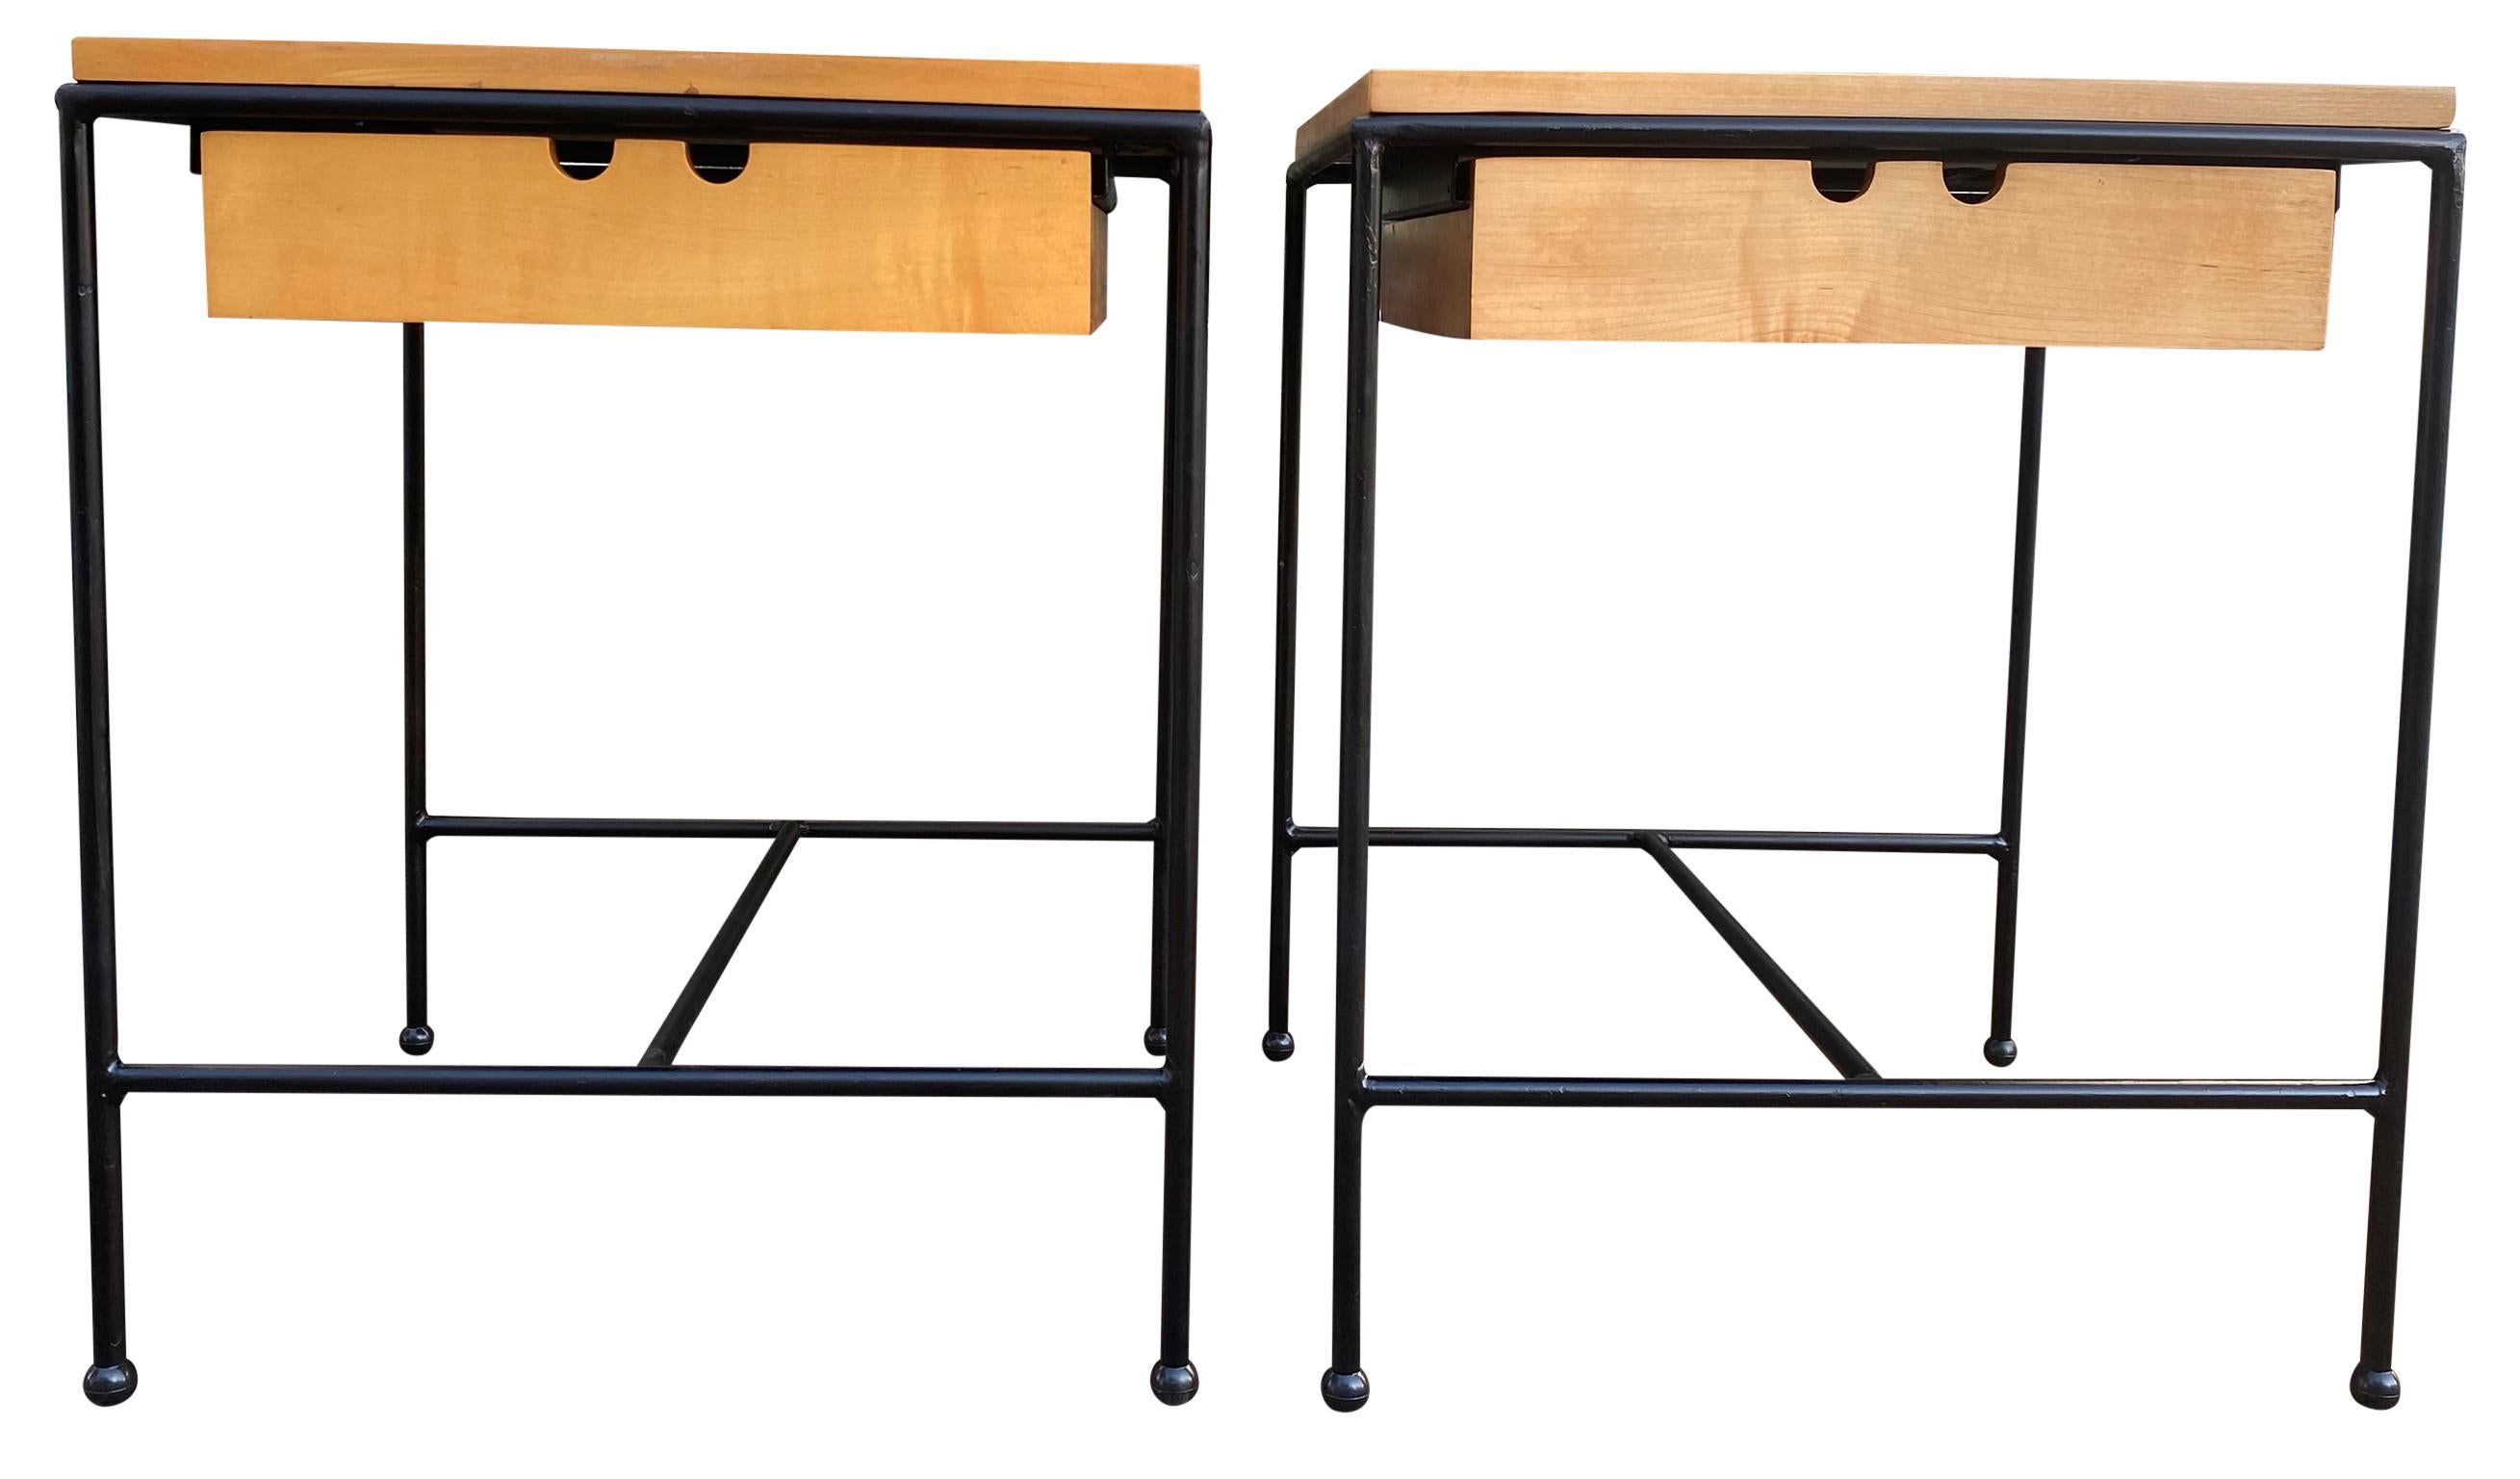 Rare pair of Early 1950s Paul McCobb Planner Group #1572 maple nightstands end side tables. Black Iron structure. Raw blonde maple tops with single drawer. Very modern designed pair of side tables with Iron. All solid maple. Original condition shows